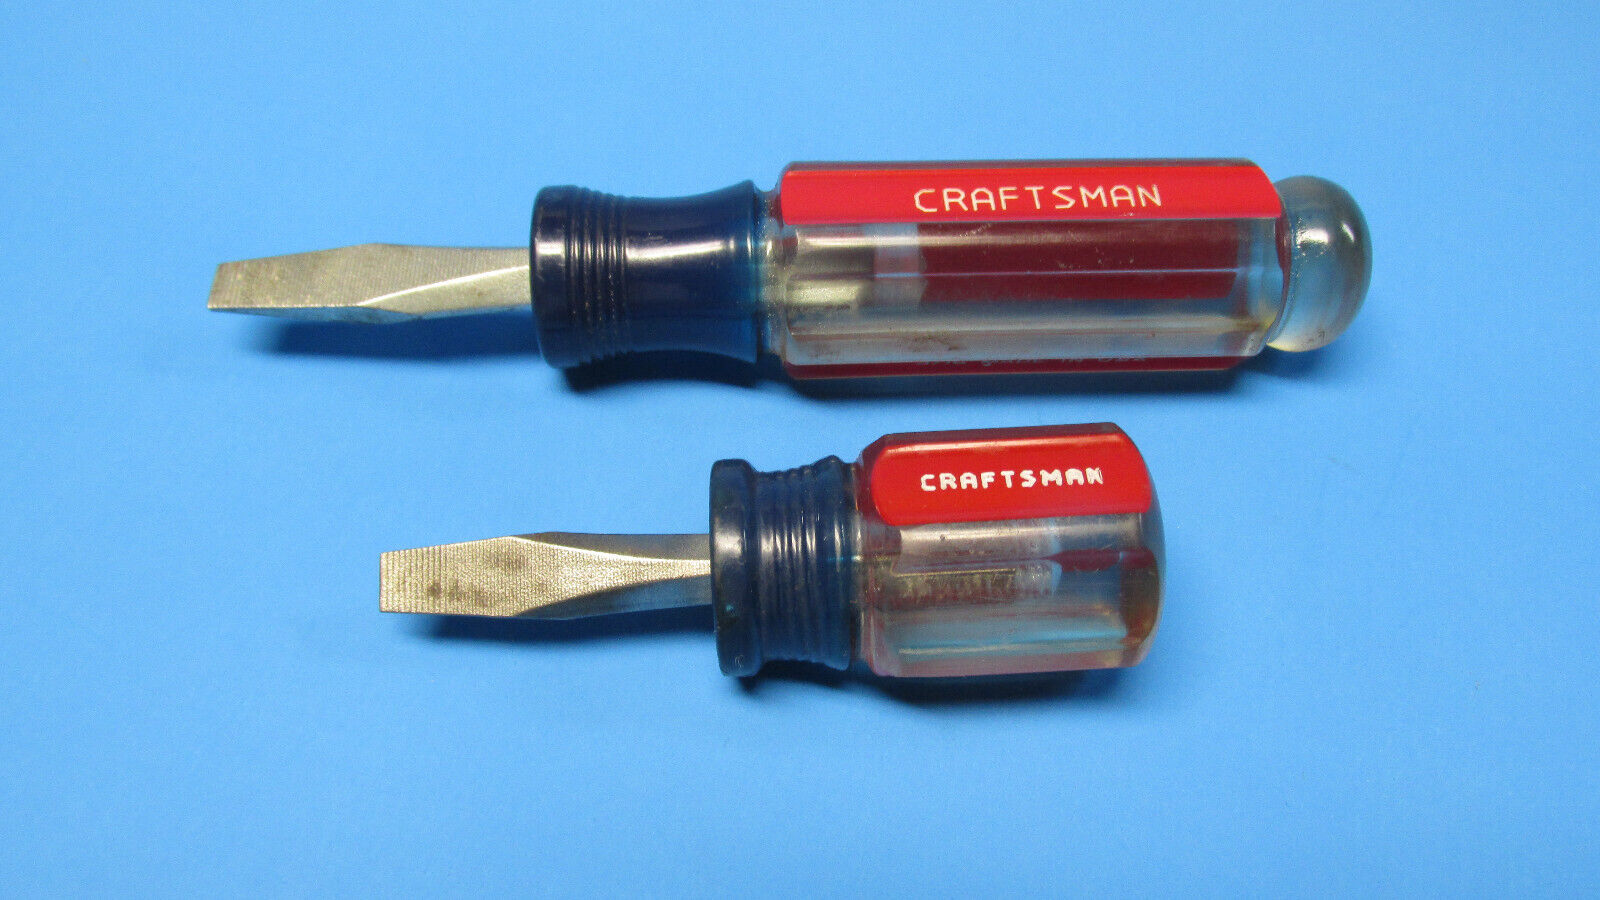 Vintage Craftsman Big & Little Stubby Screwdrivers Made in USA 41586 & No. 4151